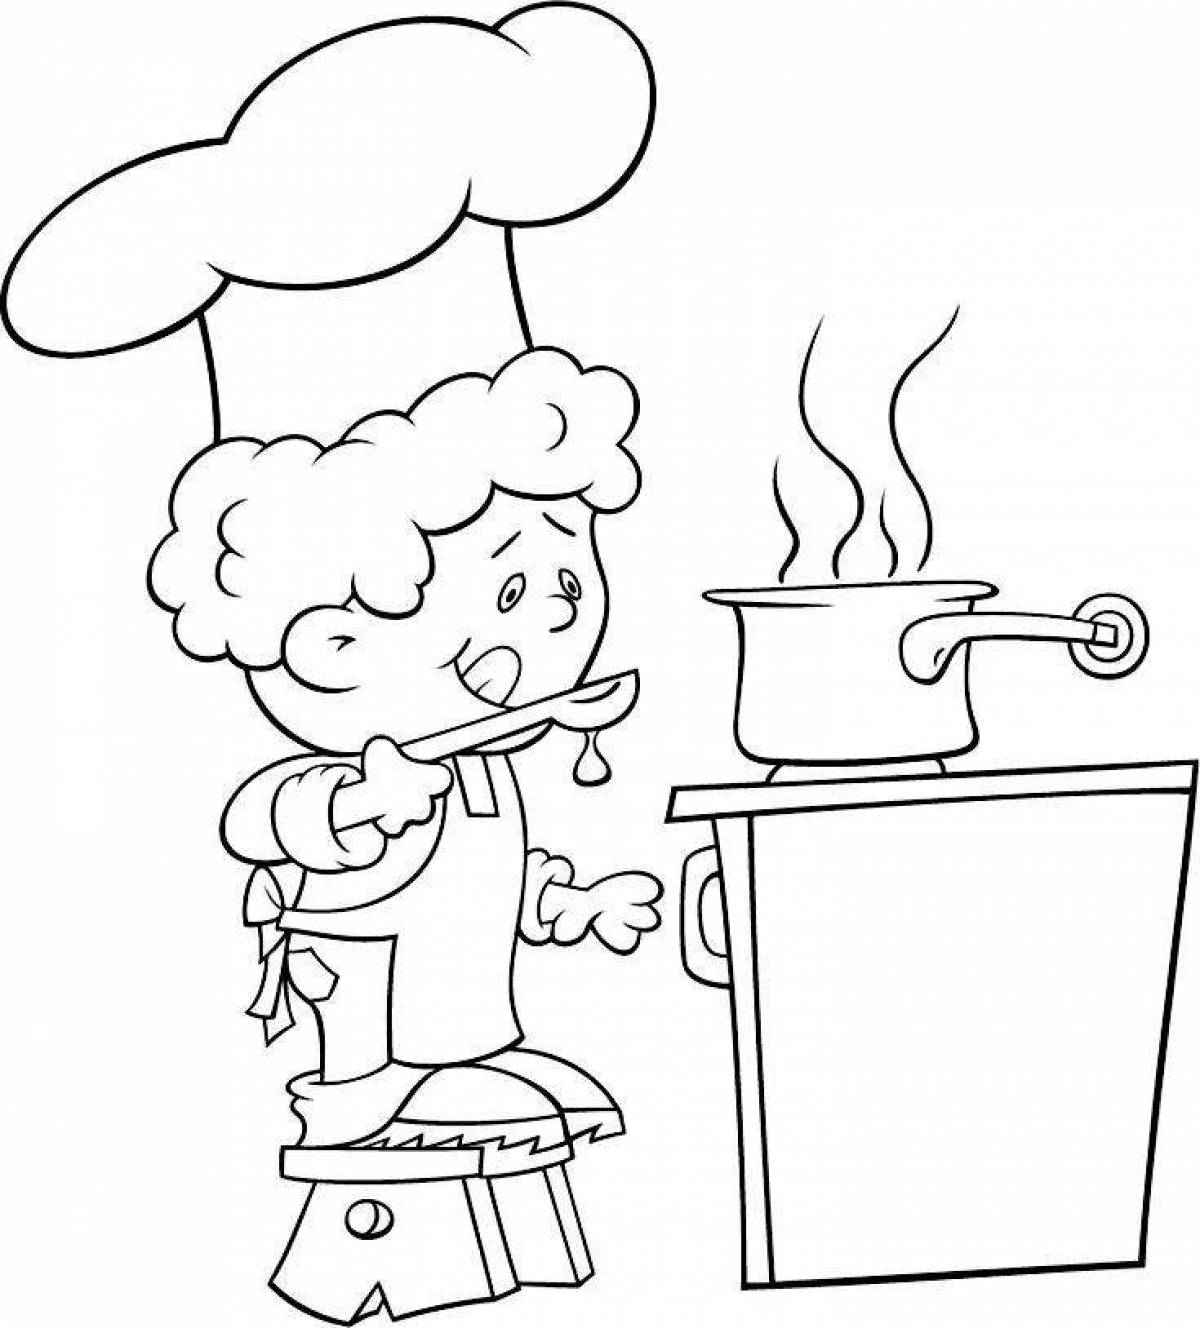 Crazy cook coloring page